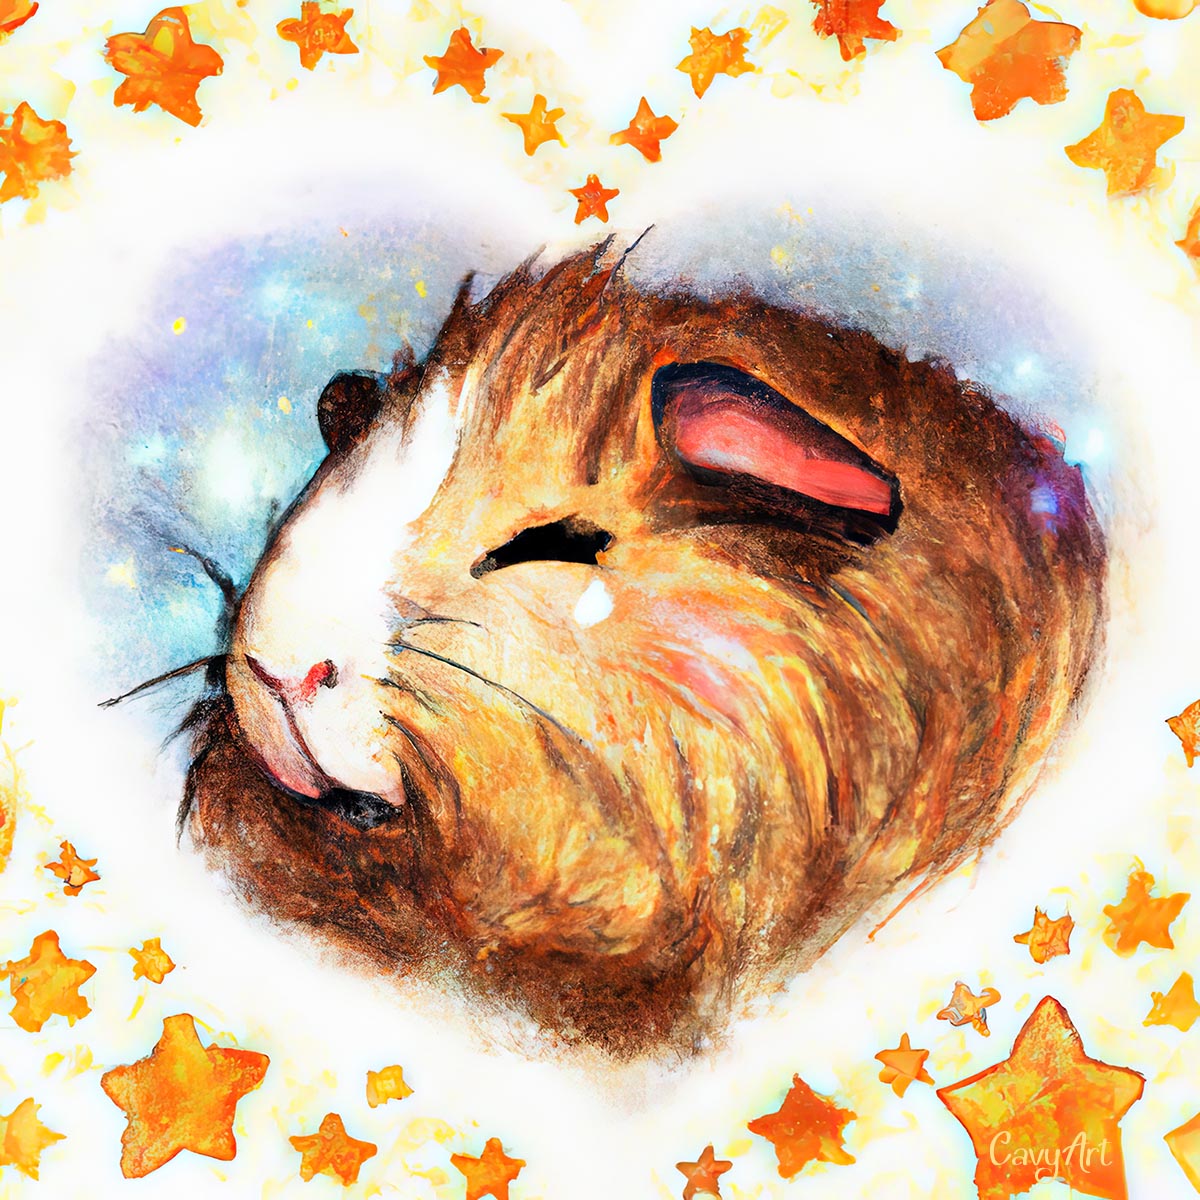 Pretty Guinea pig with stars Illustration from CavyArt